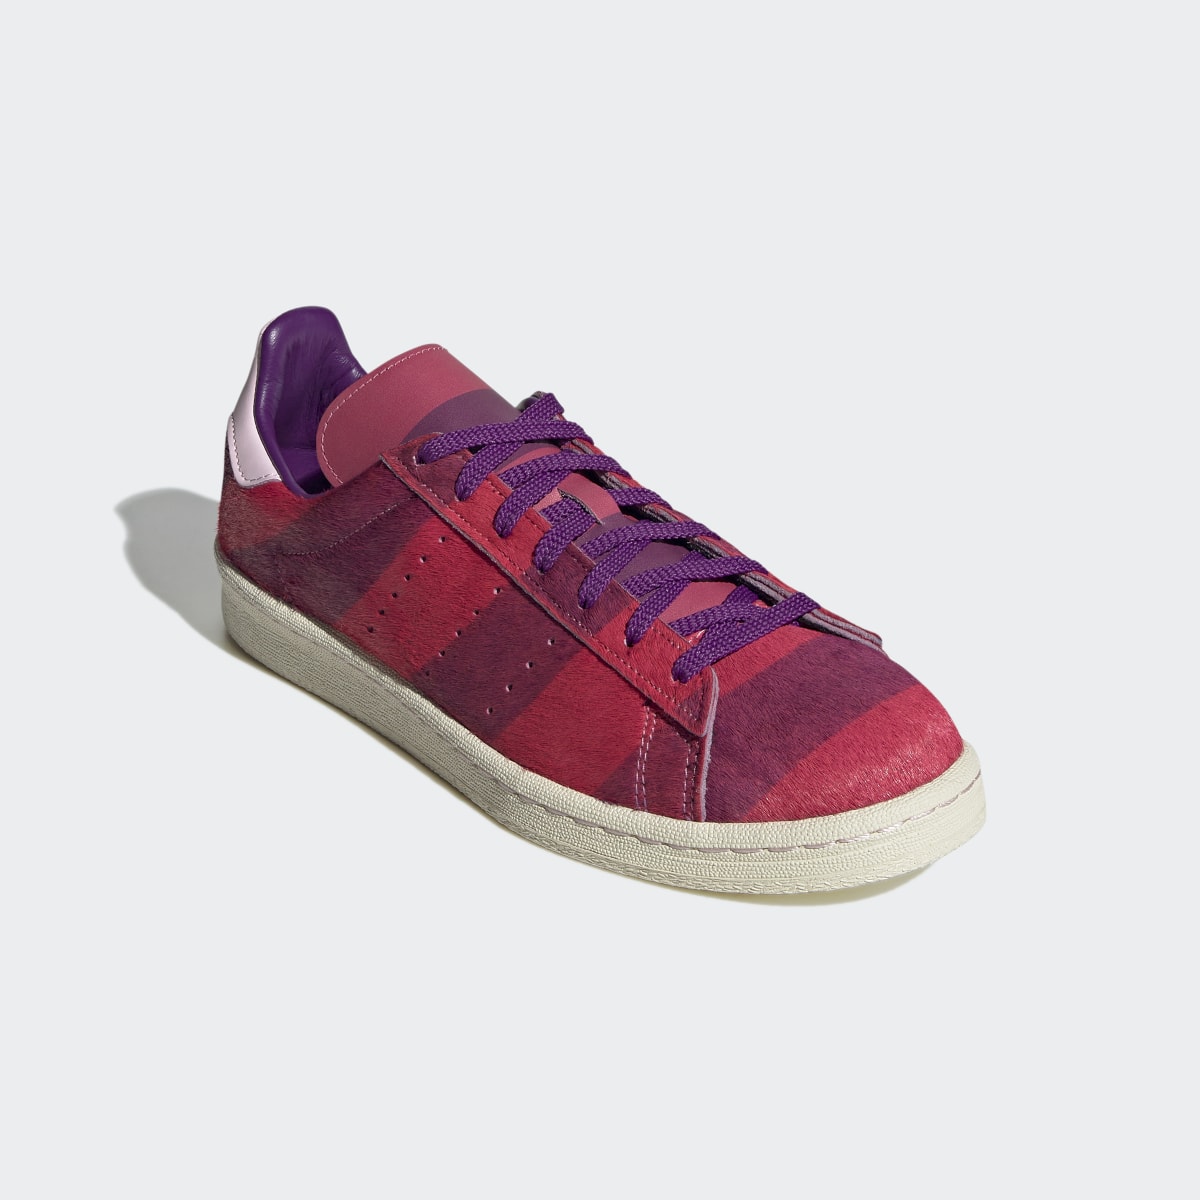 Adidas Campus 80s Cheshire Cat Shoes. 8